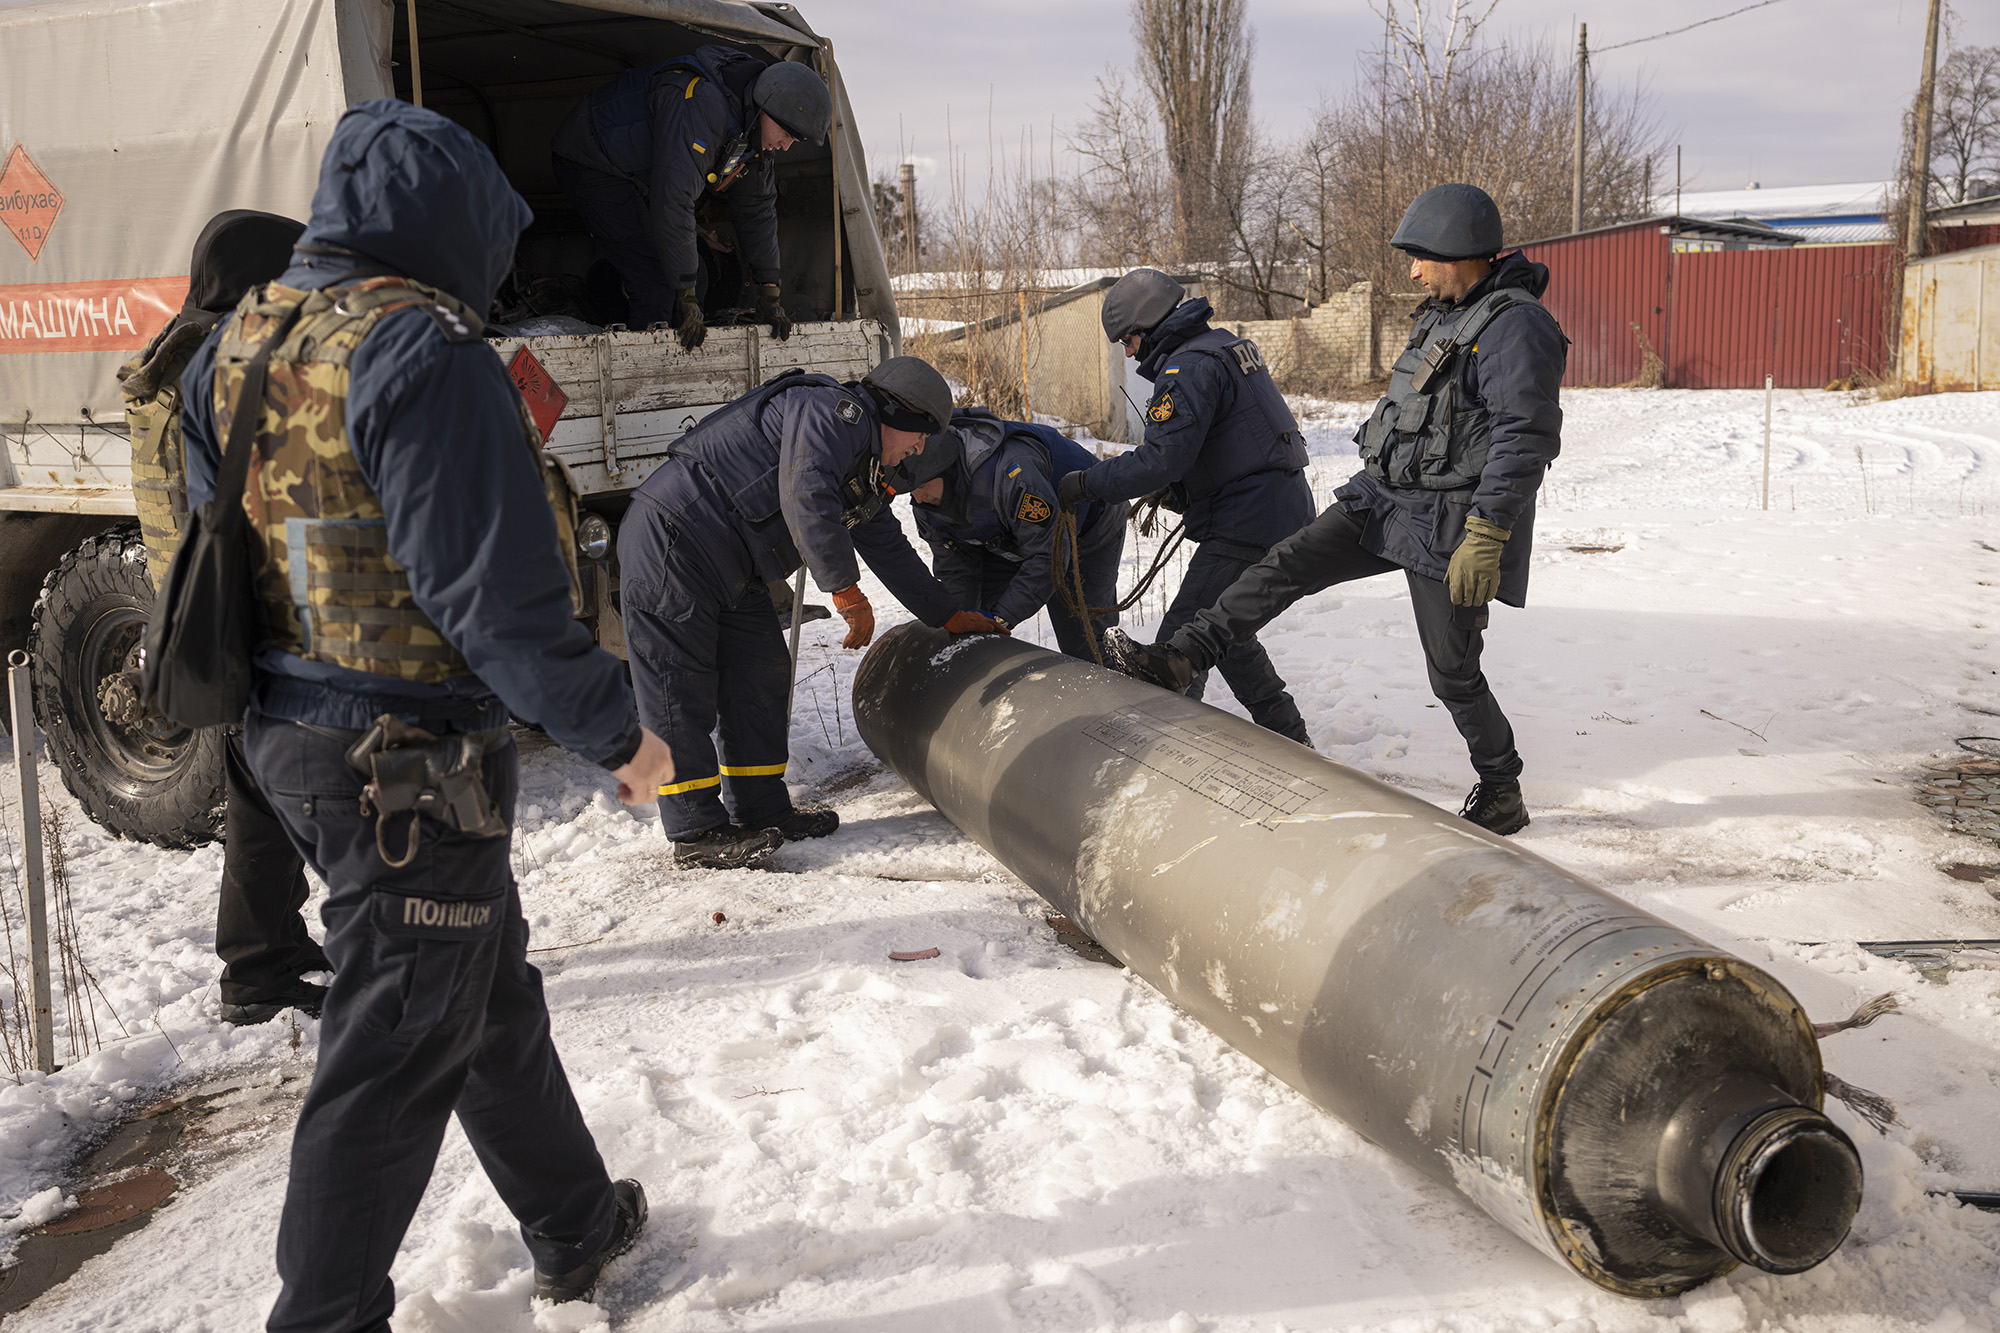 Ukrainian emergency services employees prepare to load the remains of an S-300 missile fired by Russian forces onto a truck in Kharkiv, Ukraine, on February 17.